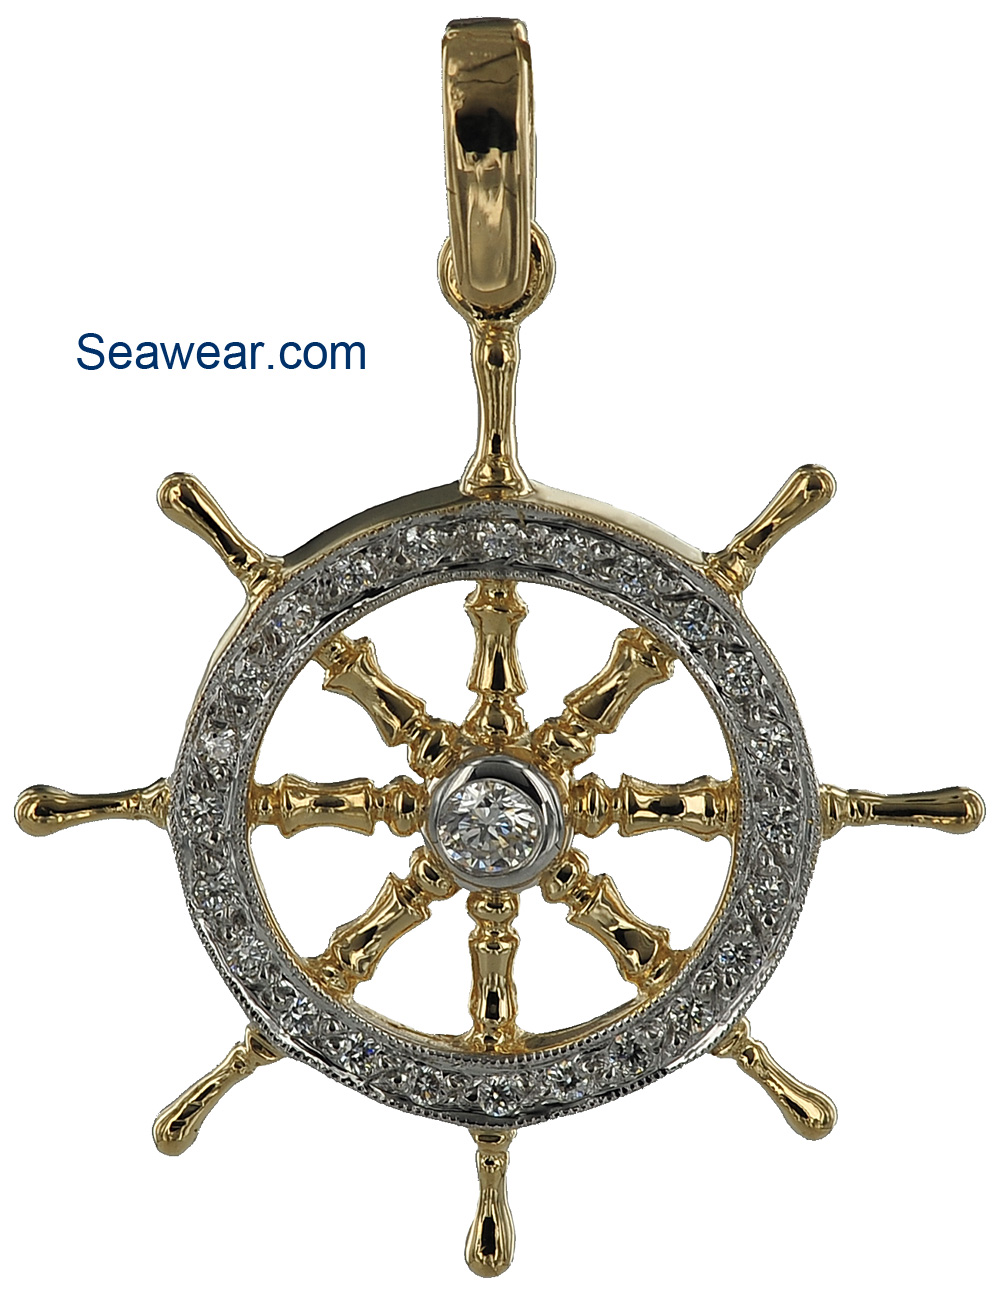 39 mm Jewels Obsession Solid 14K Rose Gold Ships Wheel Pendant